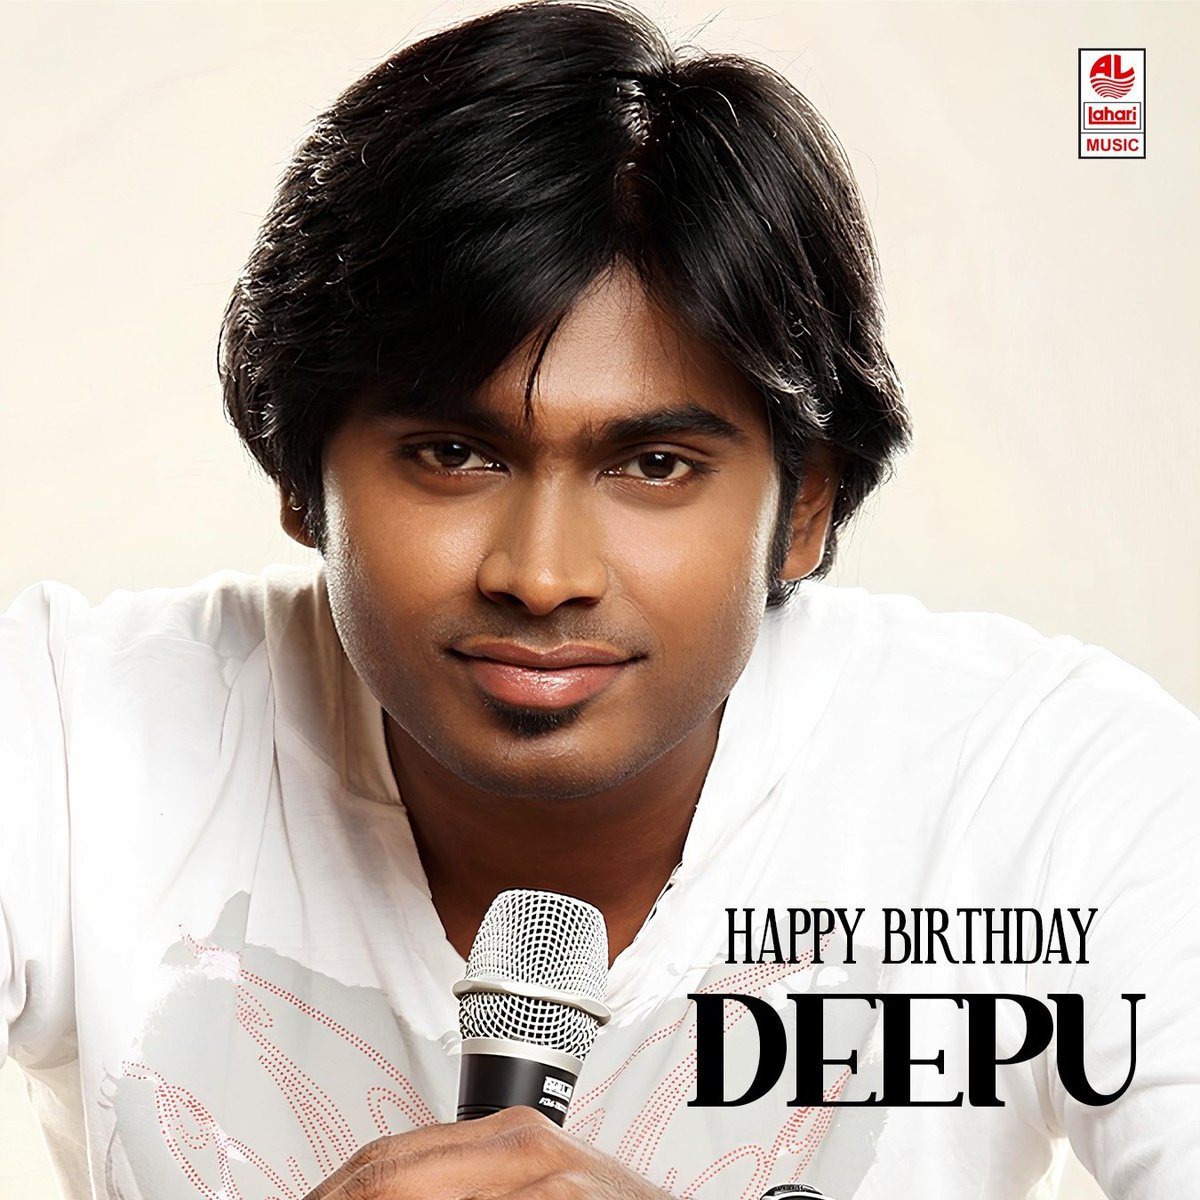 Celebrating the incredible talent of #Deepu on his special day! Happy birthday to the singer whose voice touches our souls. Here's to more heartwarming melodies! 🎵🎼

#HappyBirthdayDeepu